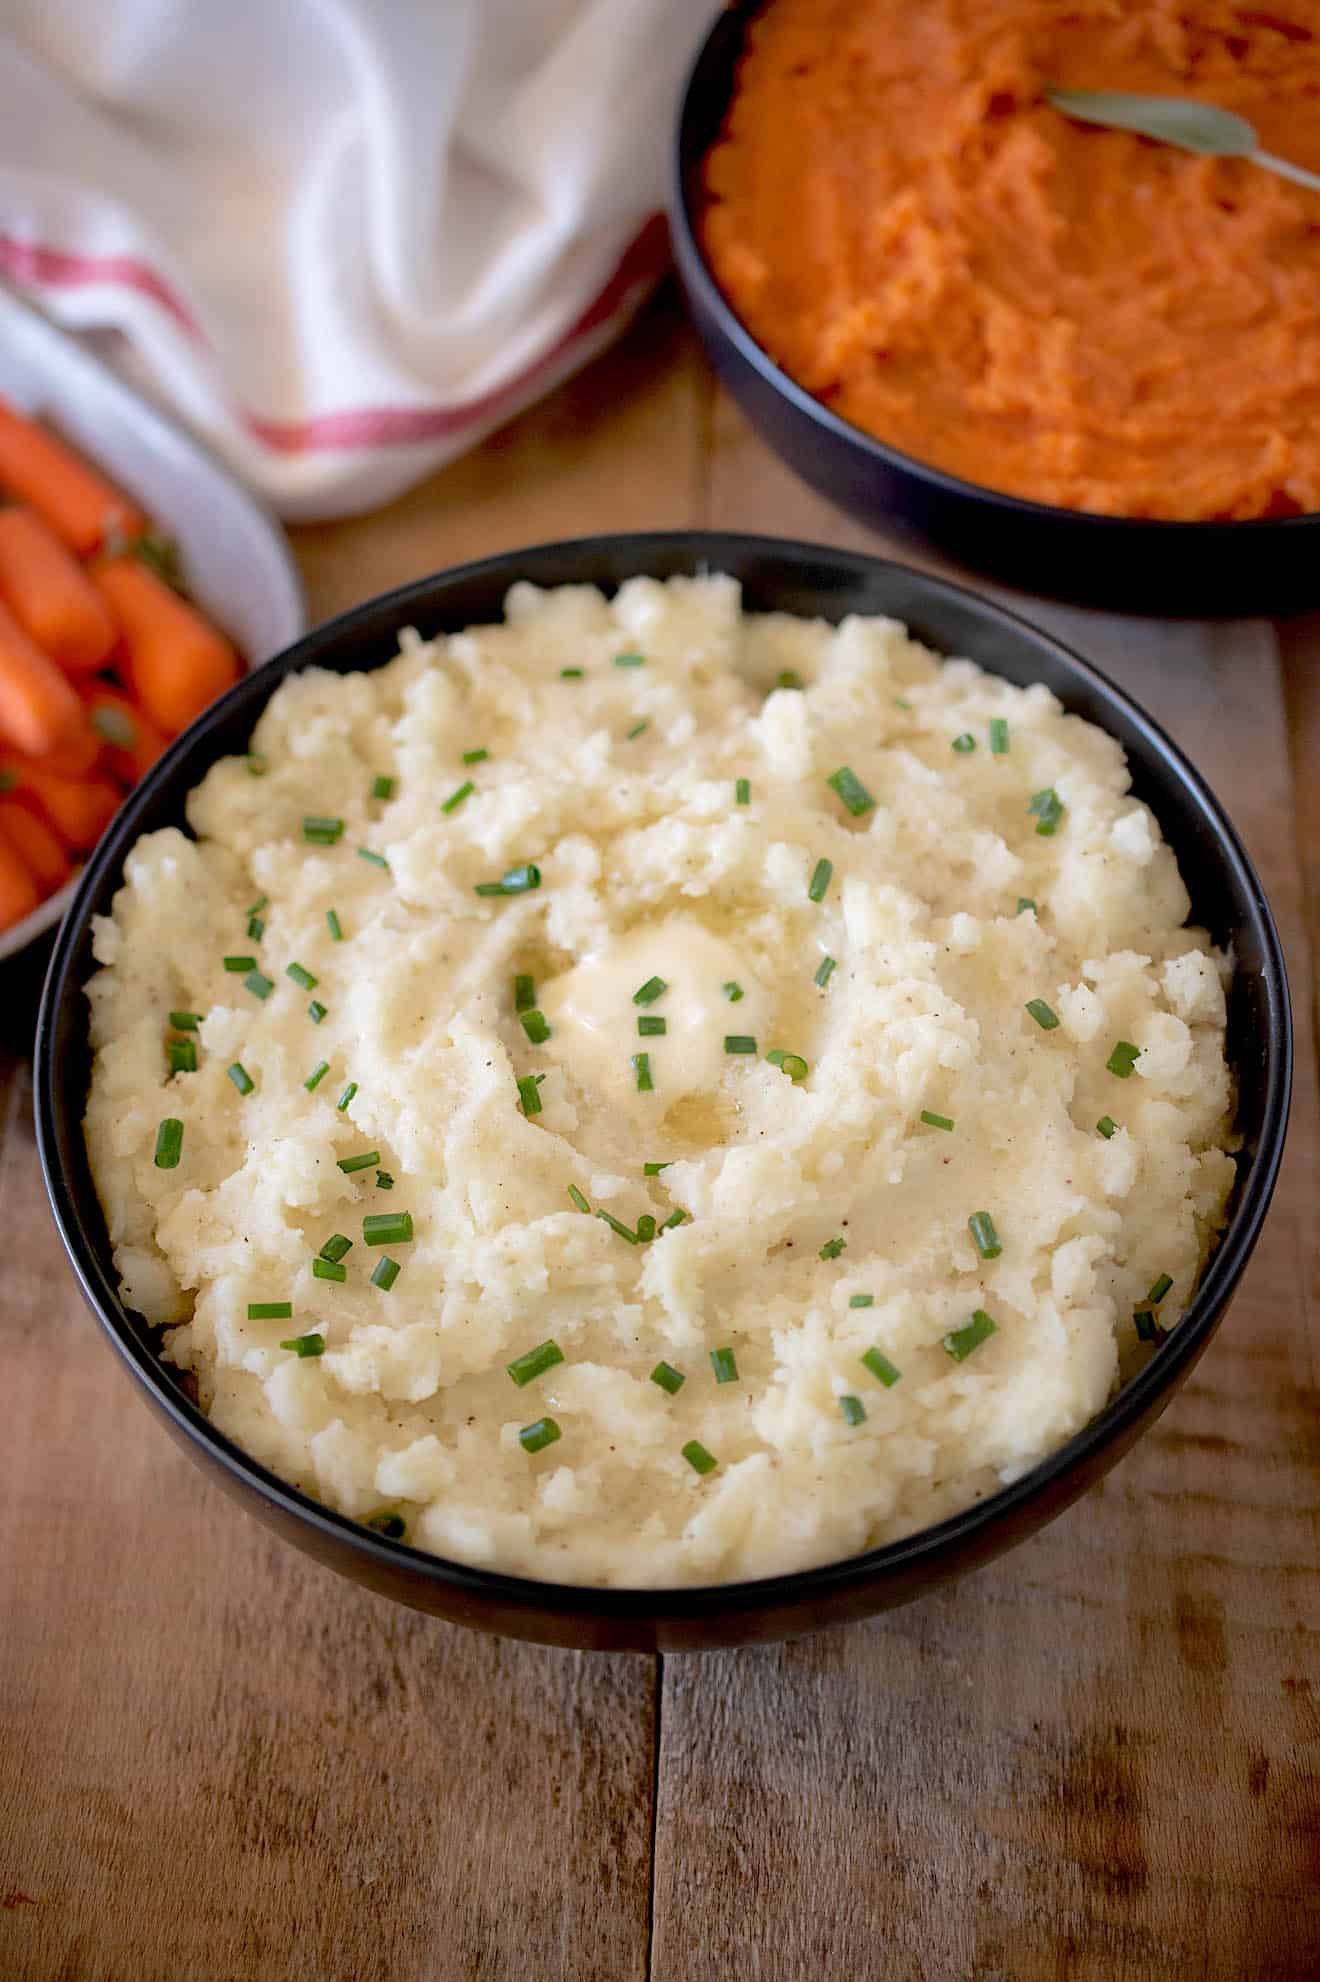 Mashed potatoes in a bowl topped with butter and chives